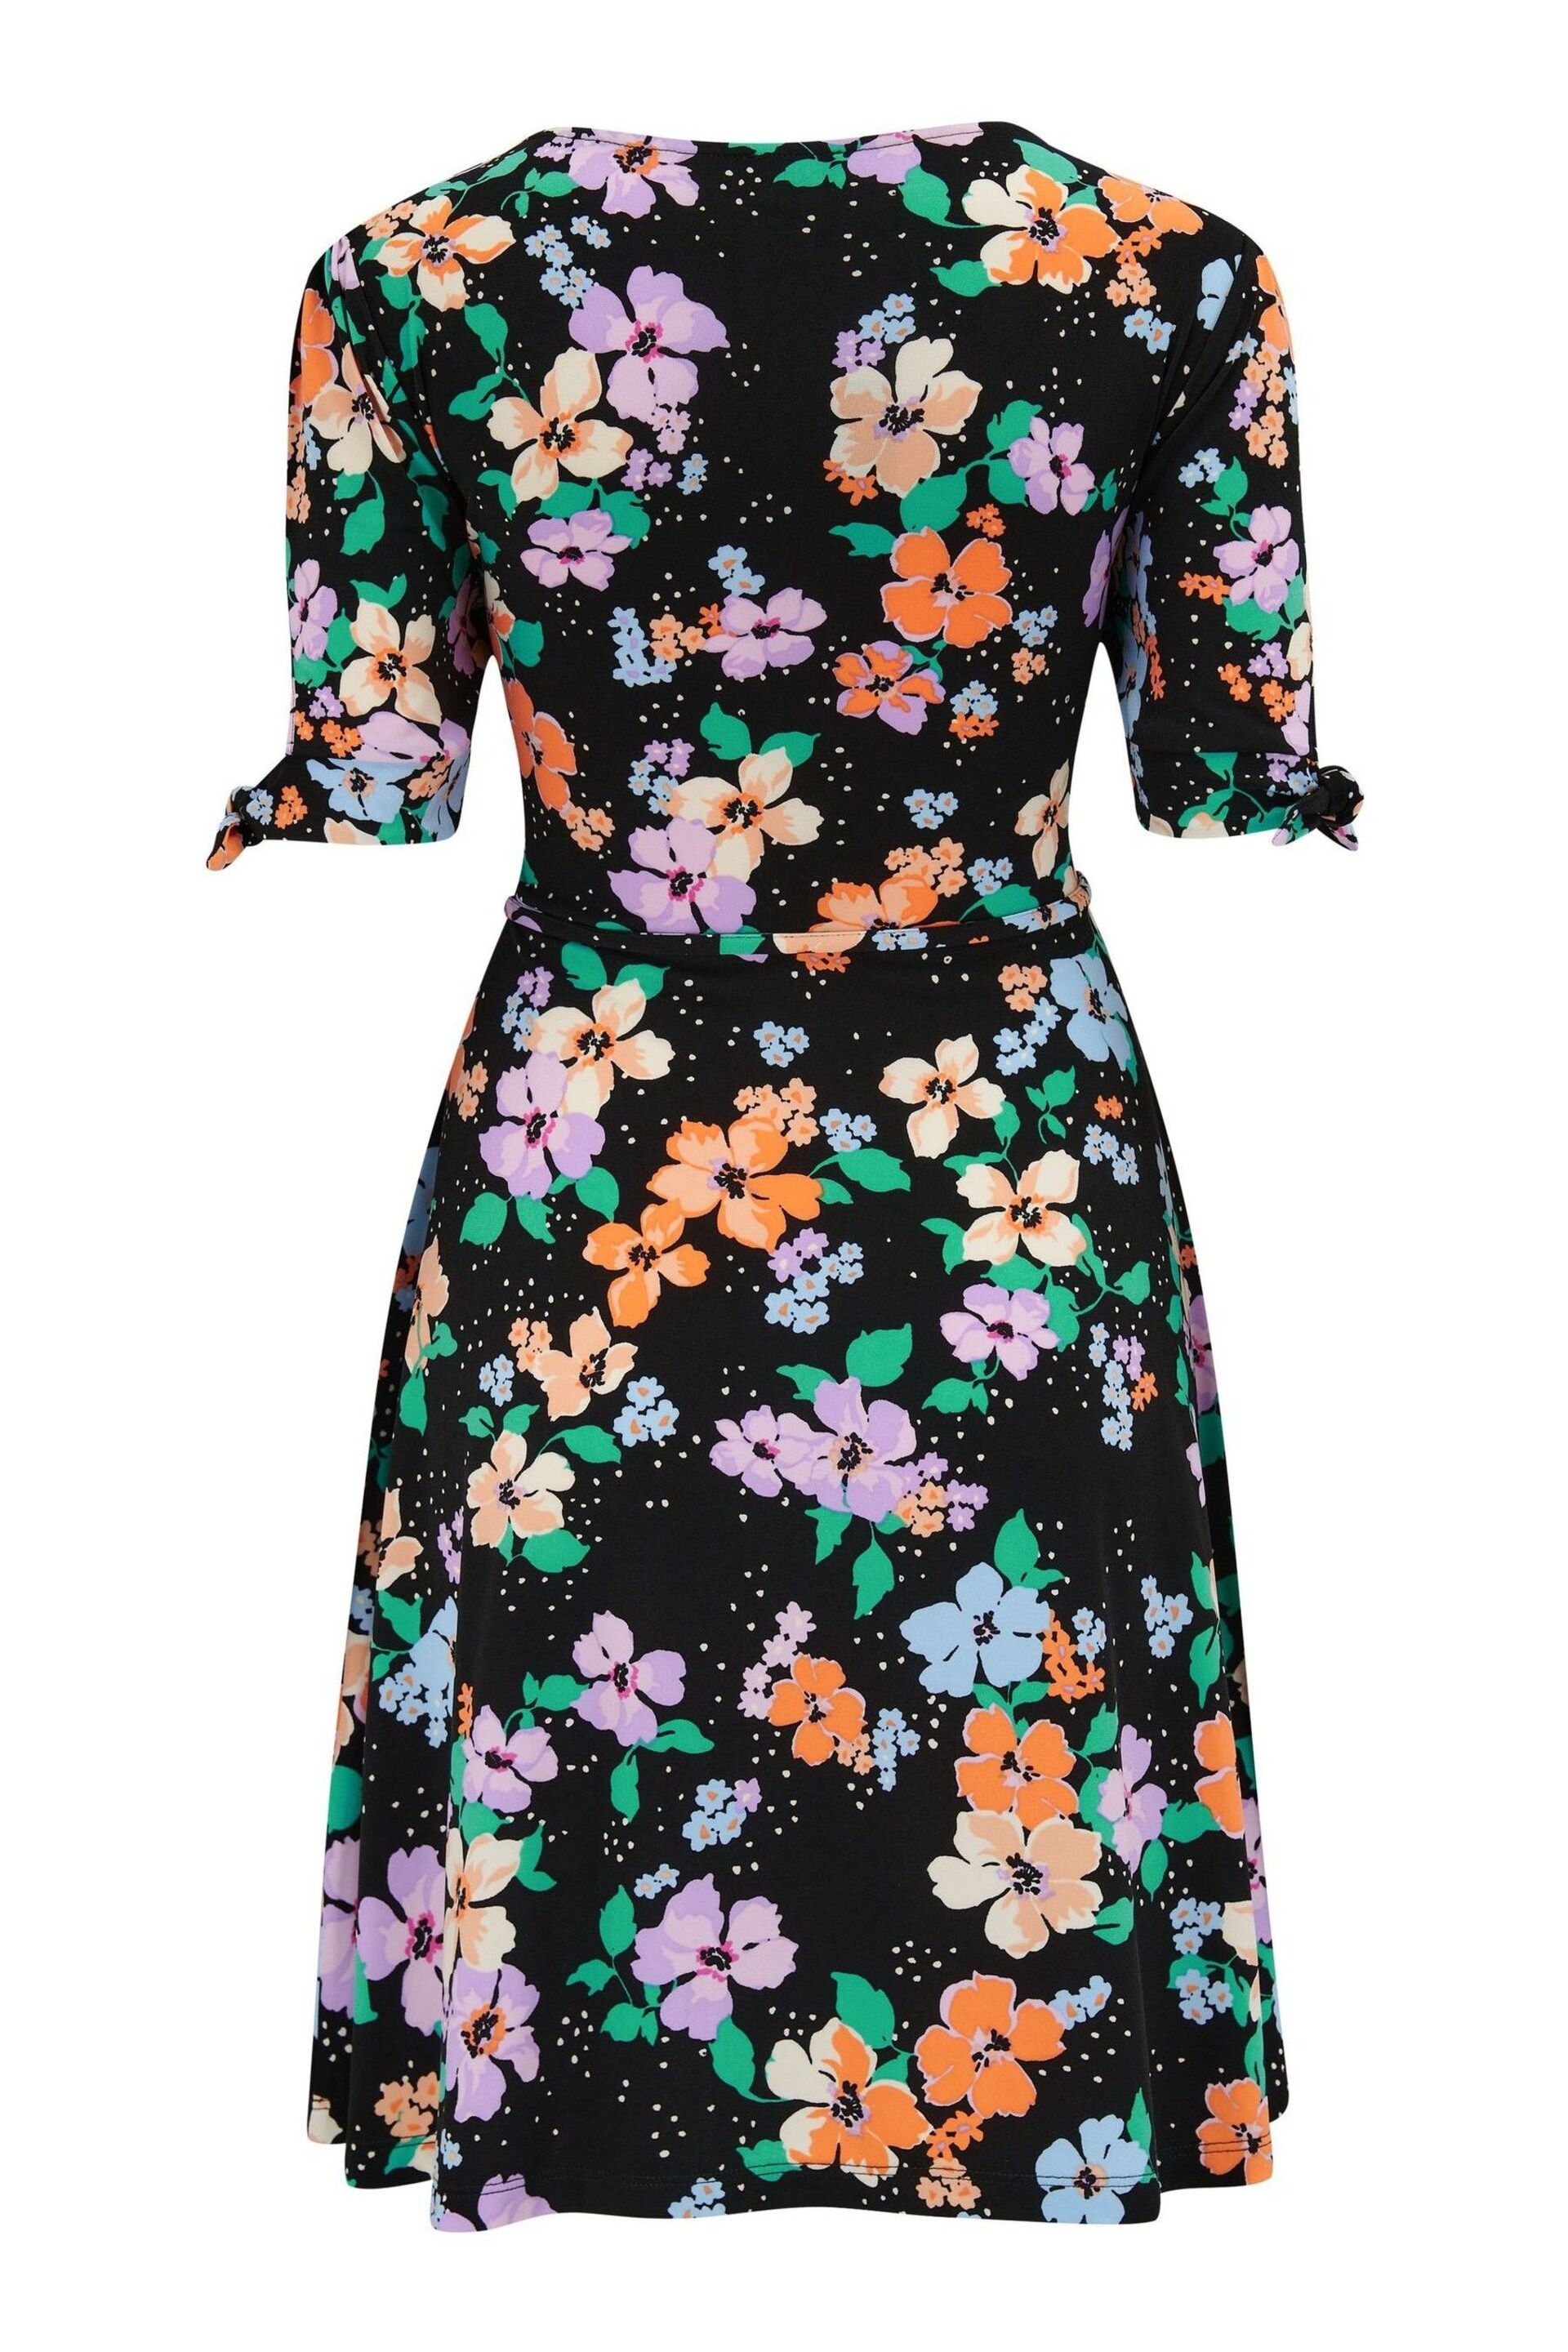 Pour Moi Black Floral Bella Fuller Bust Slinky Stretch Tie Sleeve Mini Dress - Image 4 of 4